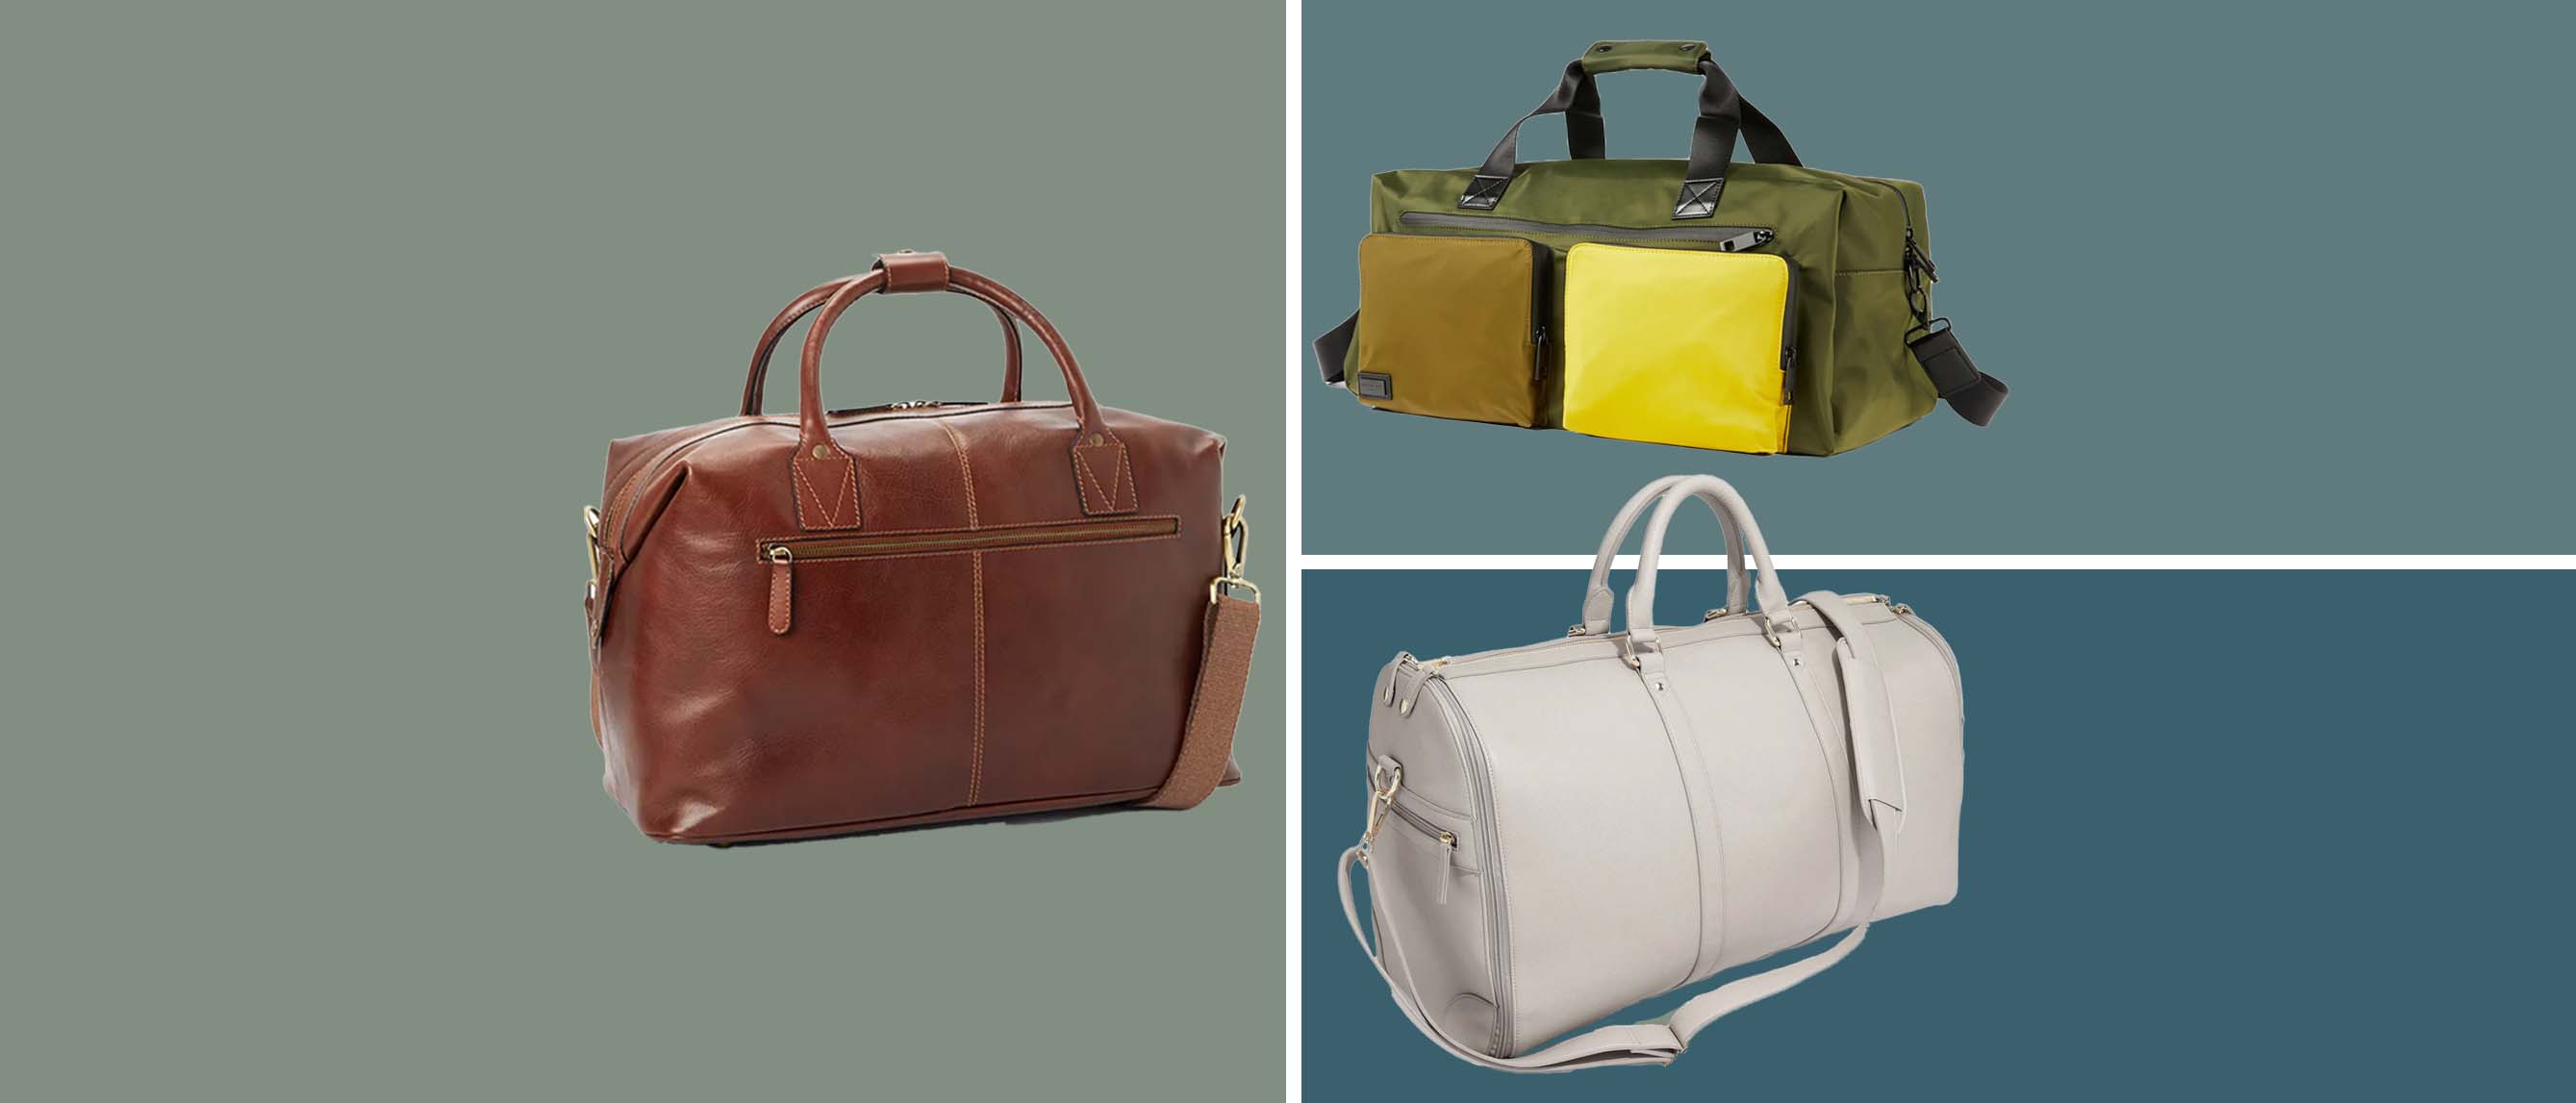 Carry your world in these trolley duffle bags | Business Insider India